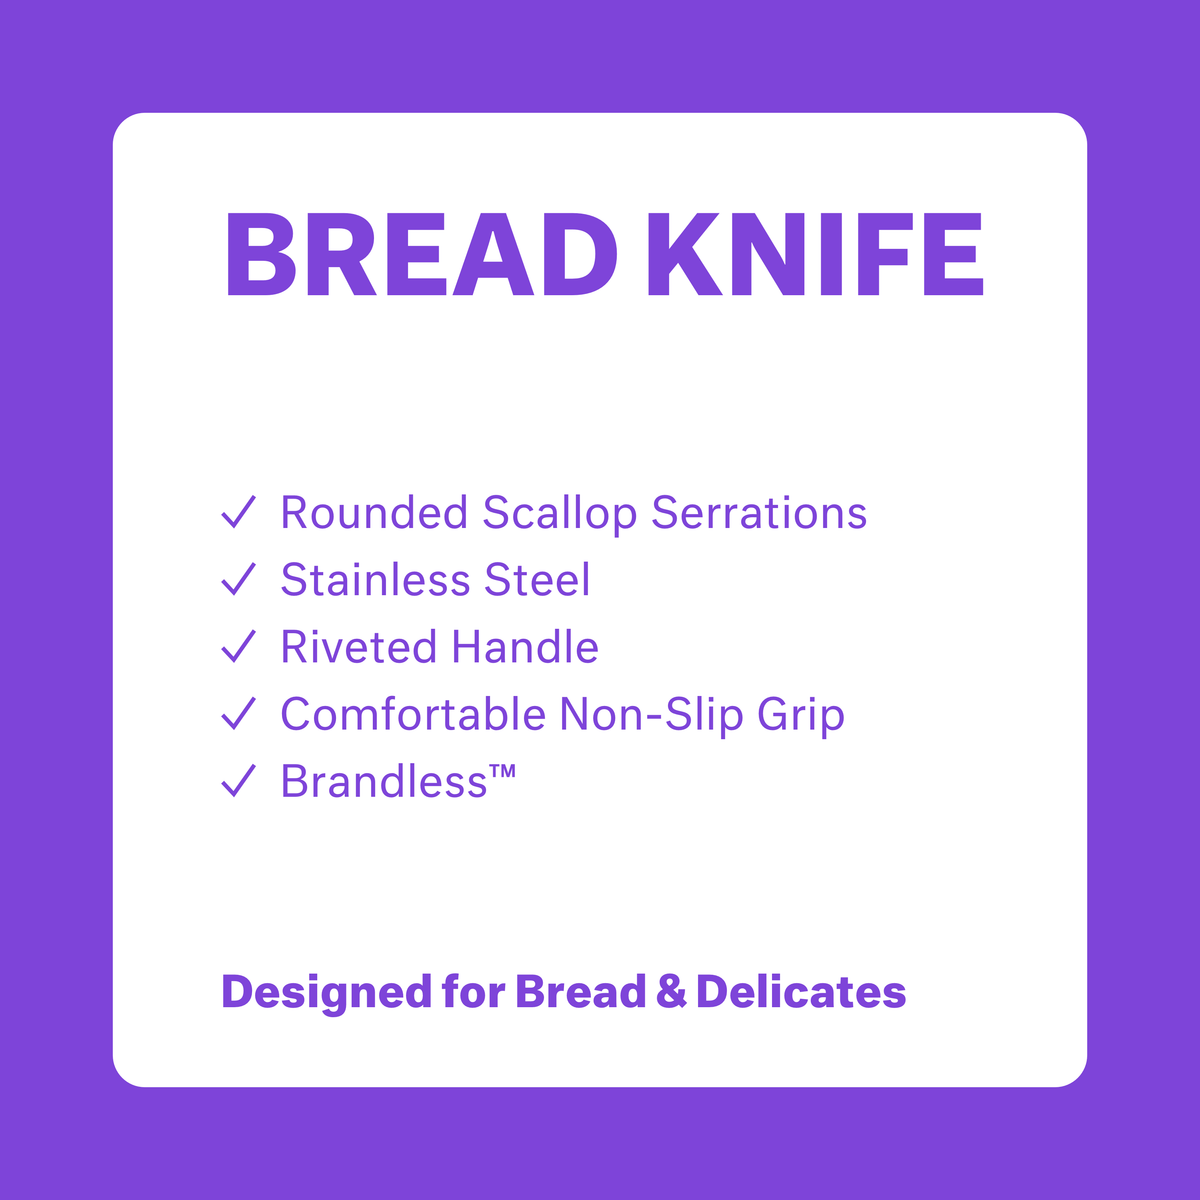 Bread knife. Rounded scallop serrations, stainless steel, riveted handle, comfortable non-slip grip, Brandless